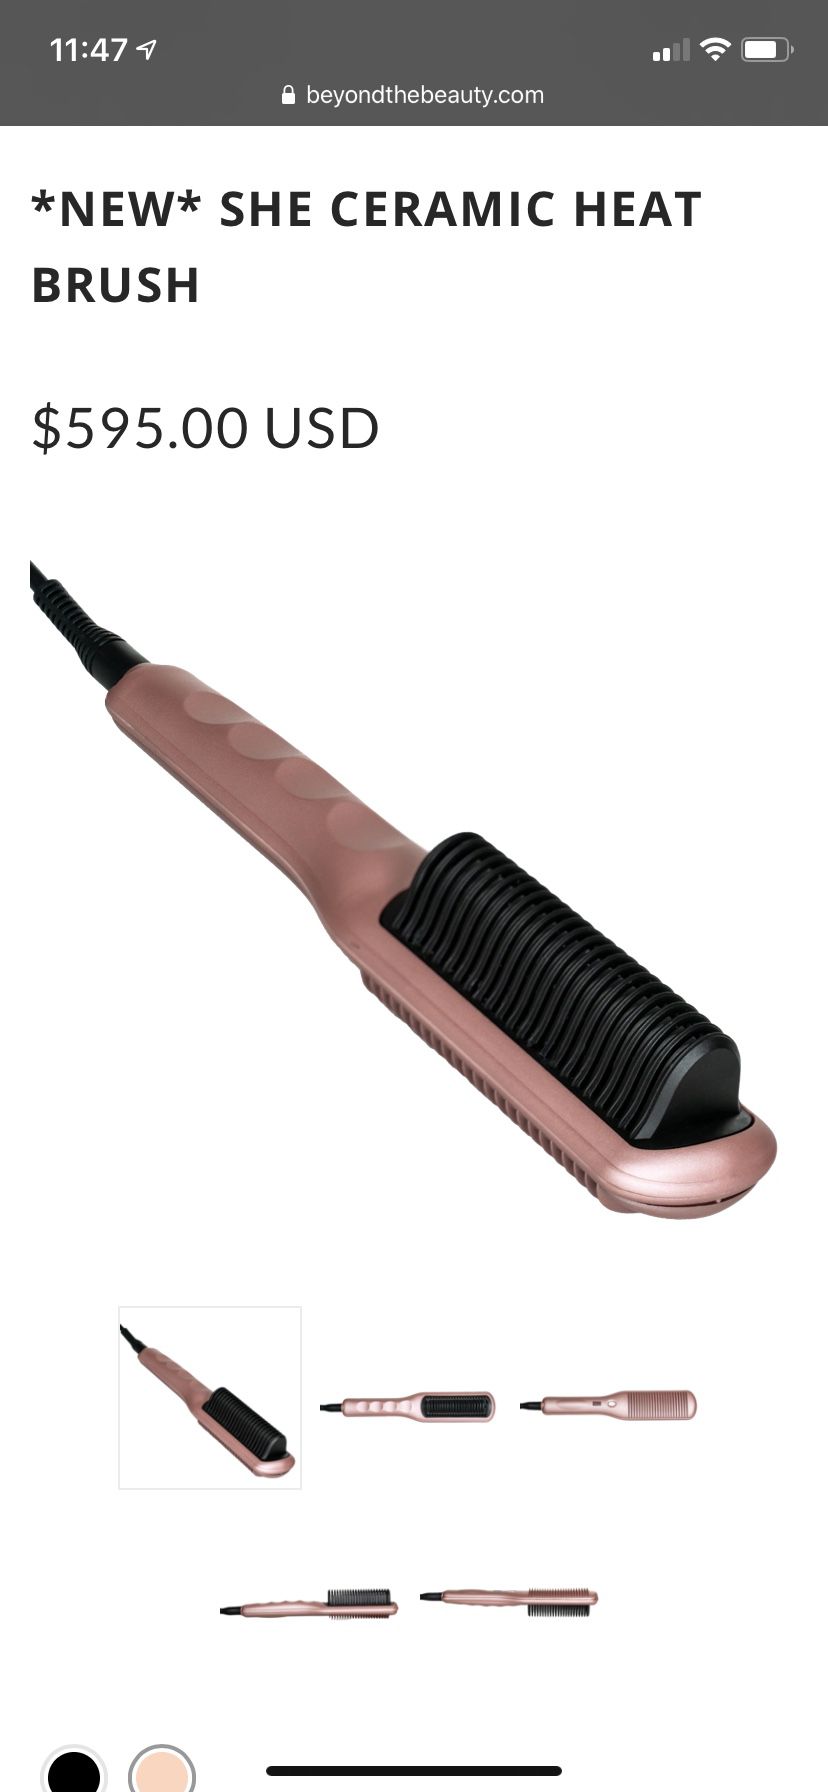 SHE by Beyond the beauty Ceramic Heat Brush